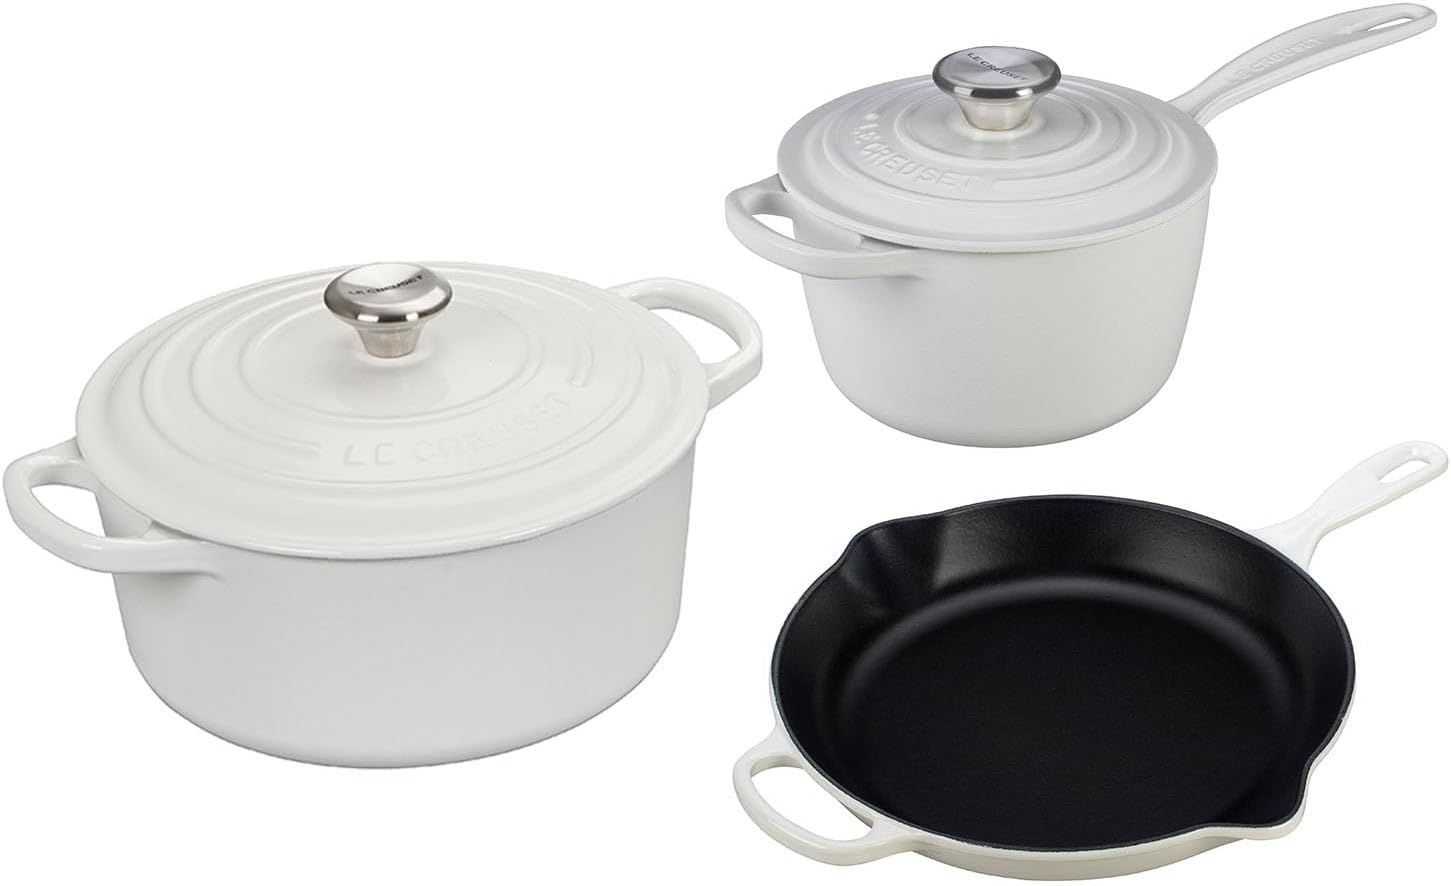 Le Creuset Enameled Cast Iron Starter Cookware Set, 5 Piece, White       Add to Logie | Amazon (US)